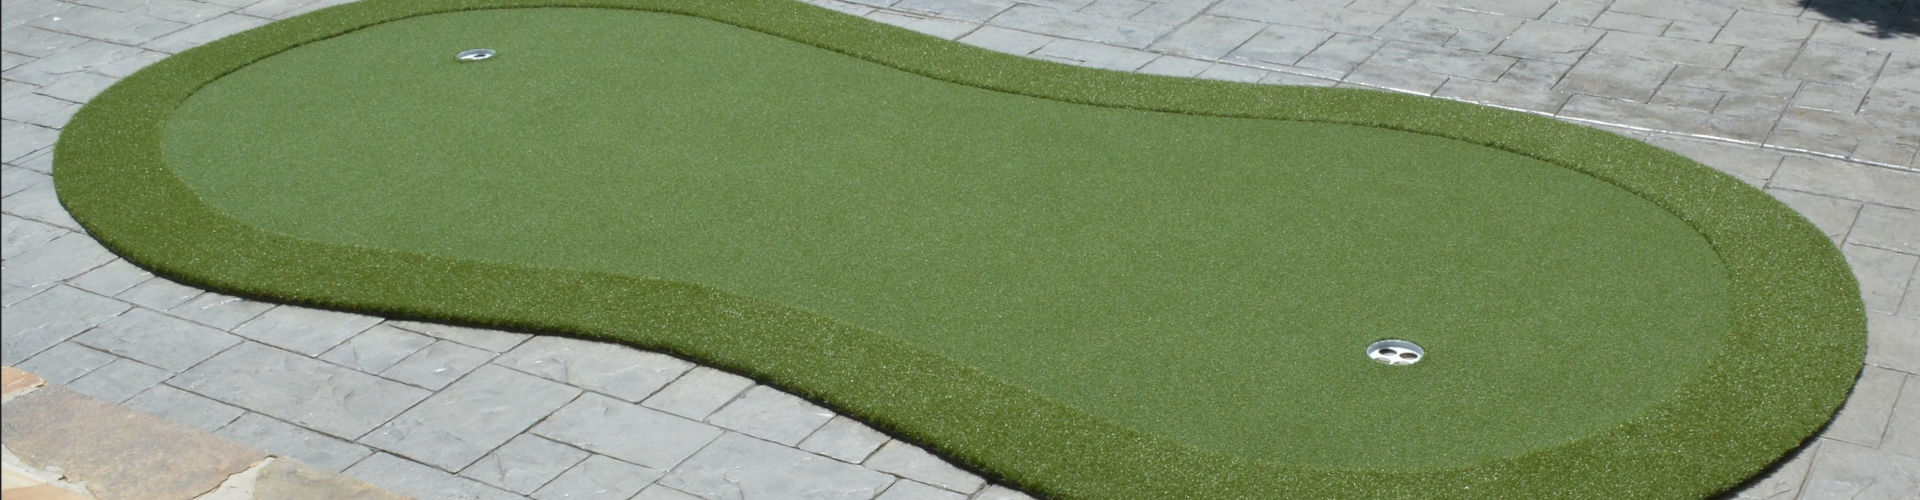 Southwest Greens East Bay Portable Putting Green